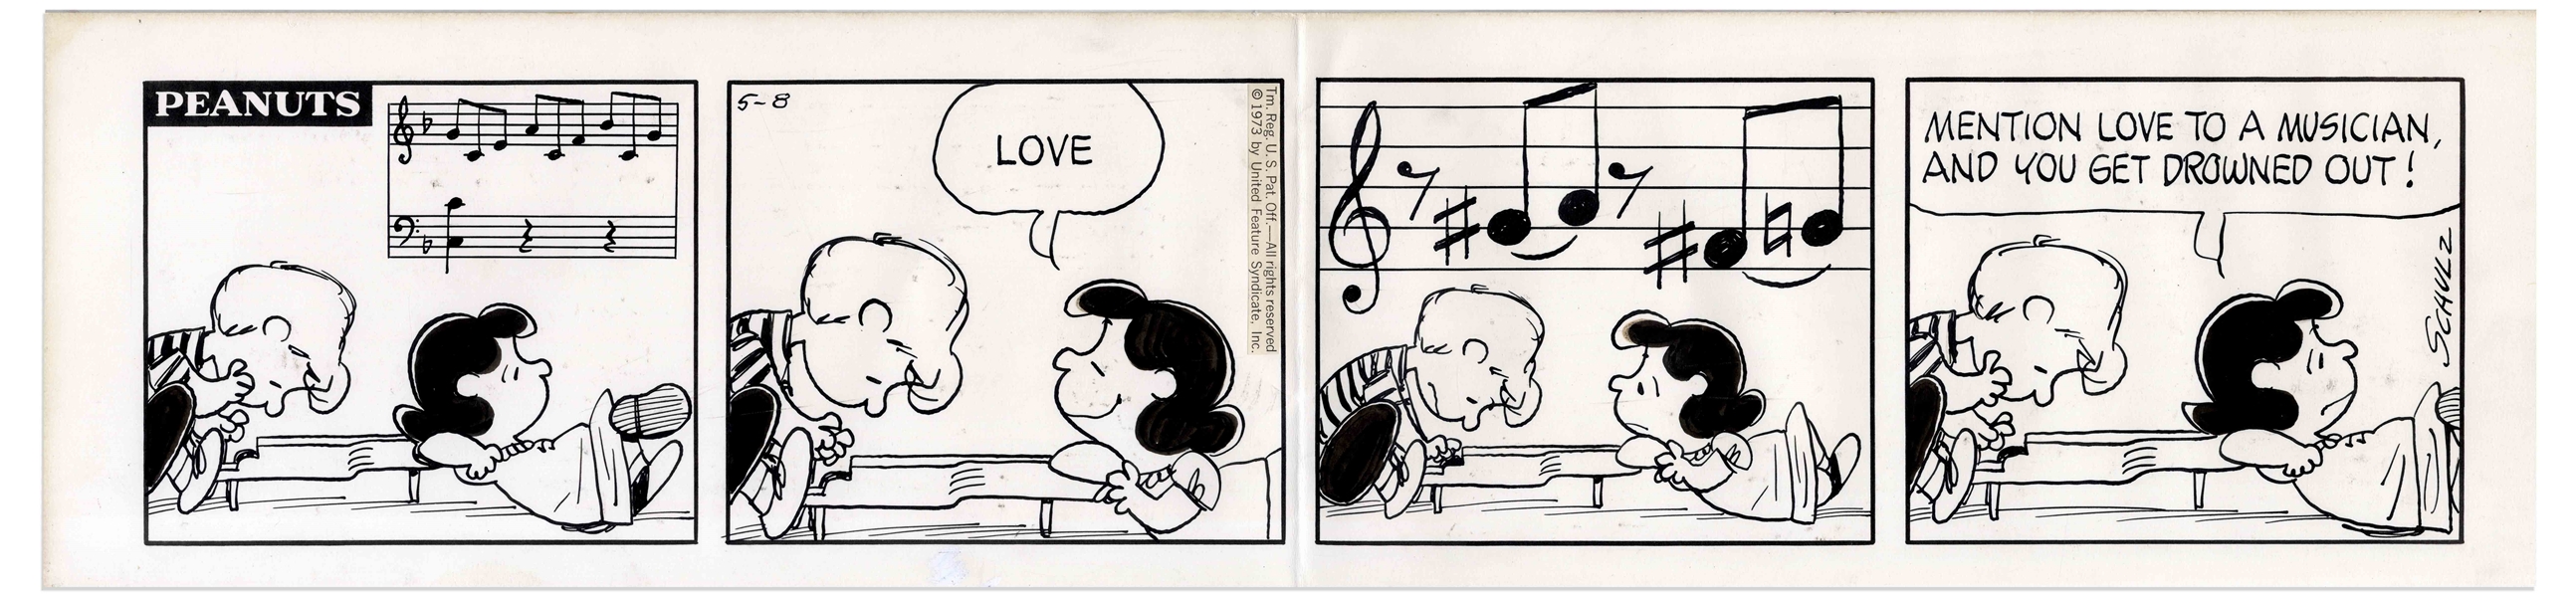 Charles Schulz Original ''Peanuts'' Comic Strip Featuring Schroeder & Lucy -- With Hand-Drawn Musical Notes